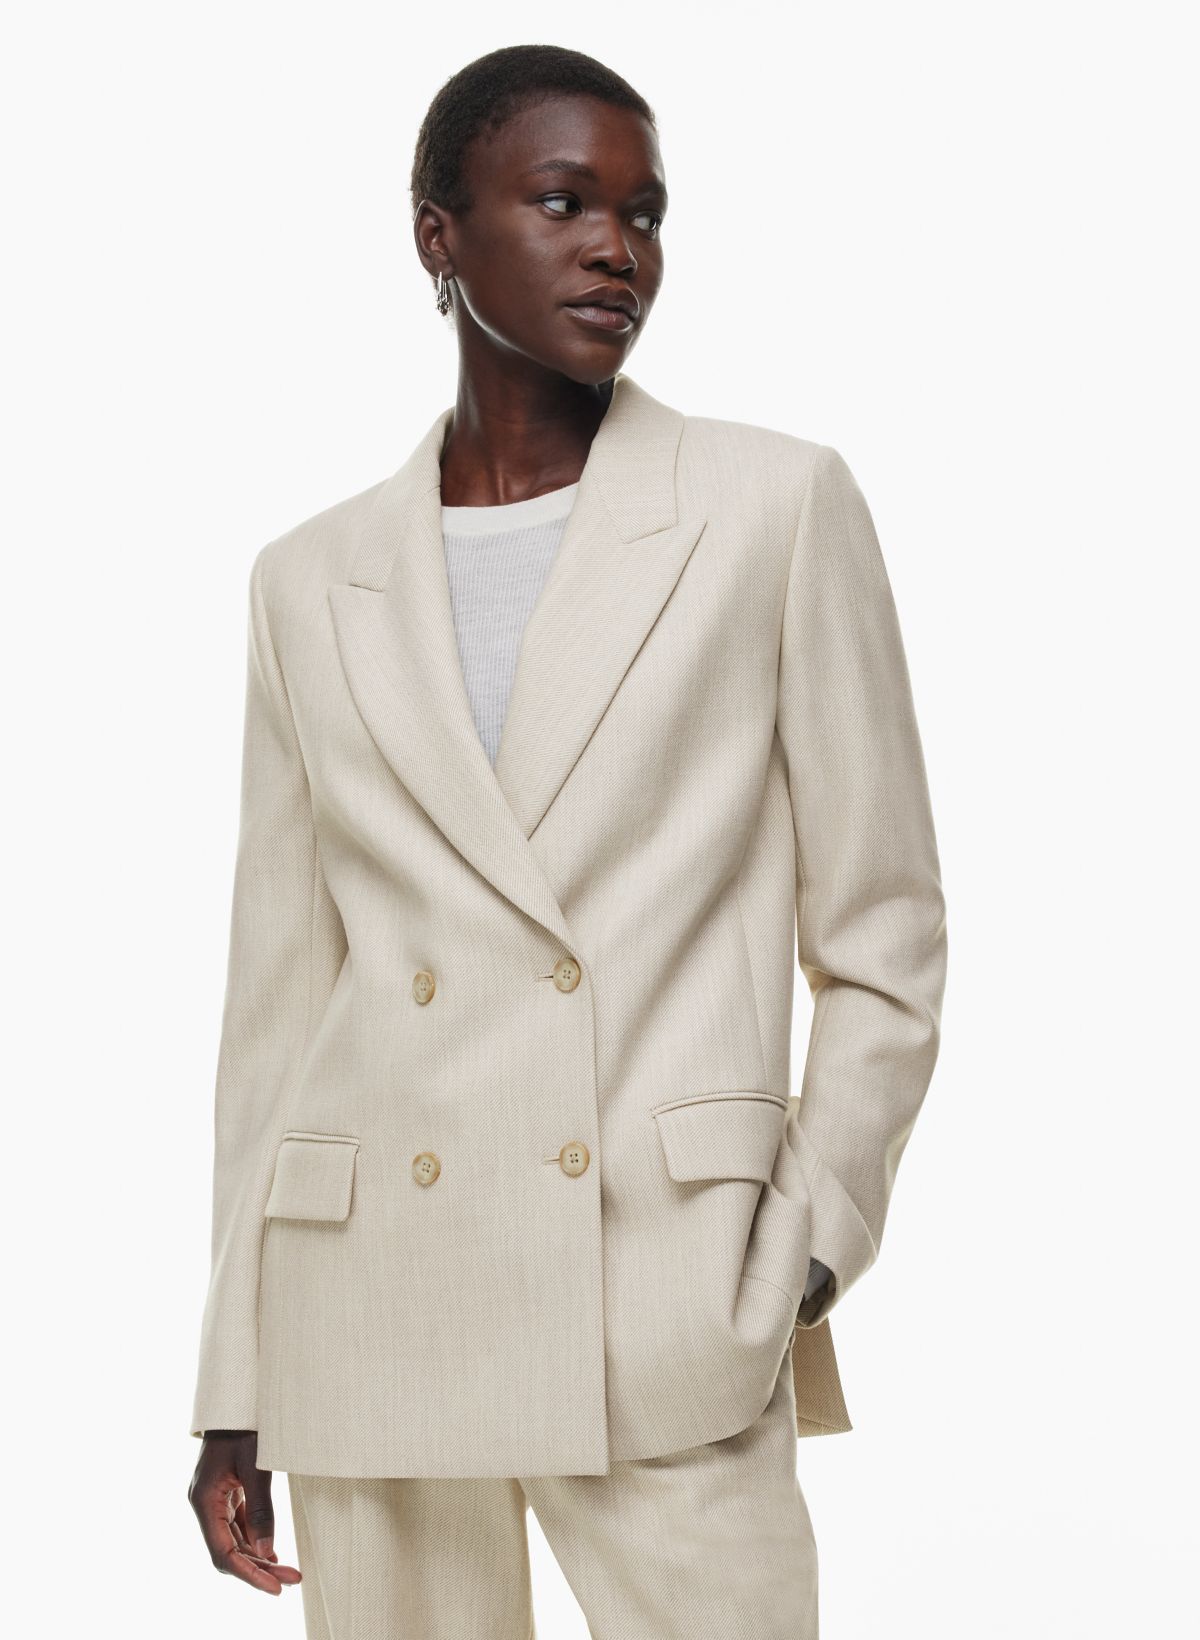 TAILORED Double Breasted Contour Blazer in Off White. Also offered